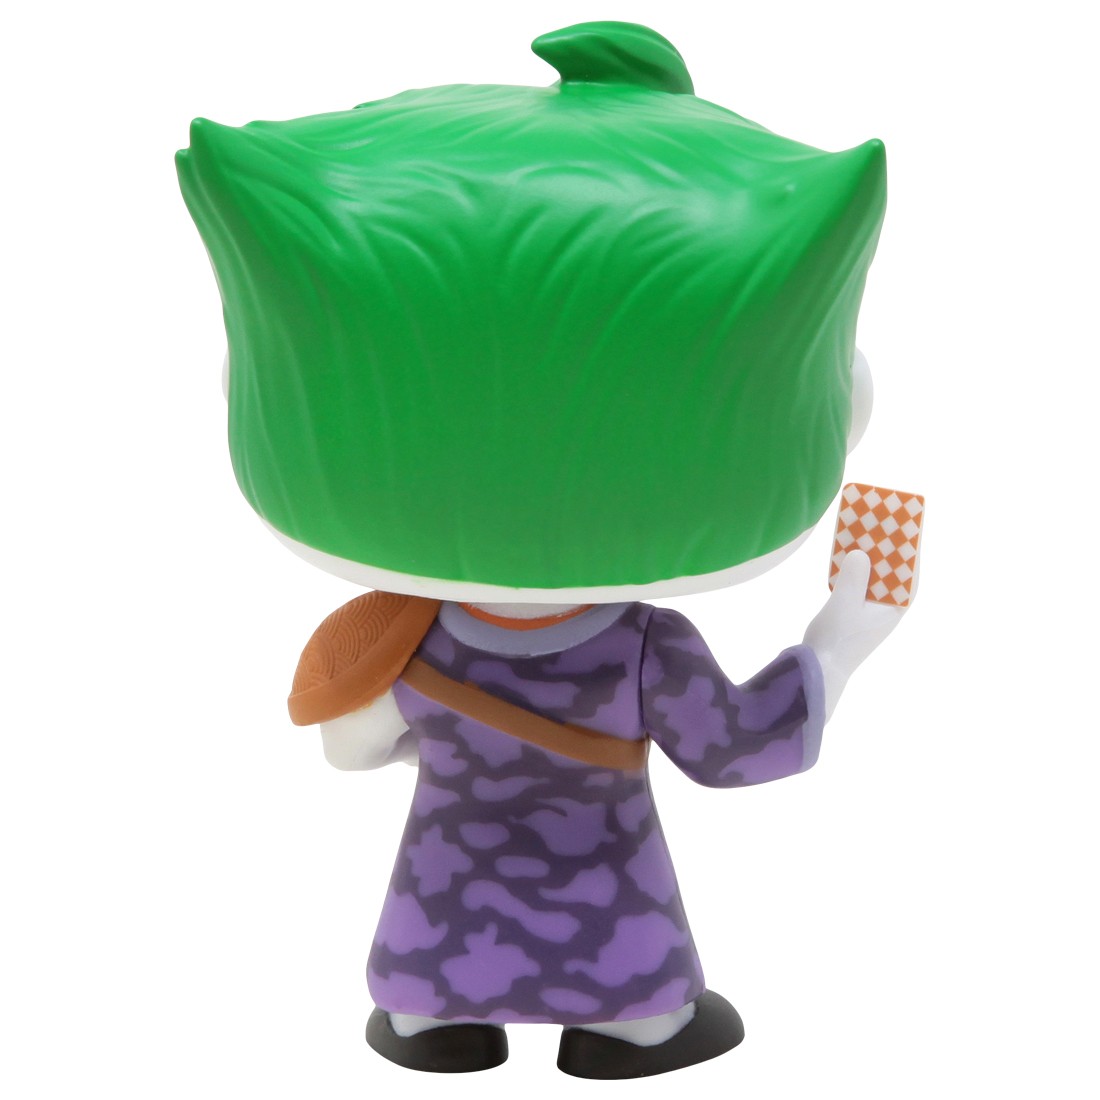 IN STOCK: Funko POP Heroes: Imperial Palace - Joker with DC Sleeve